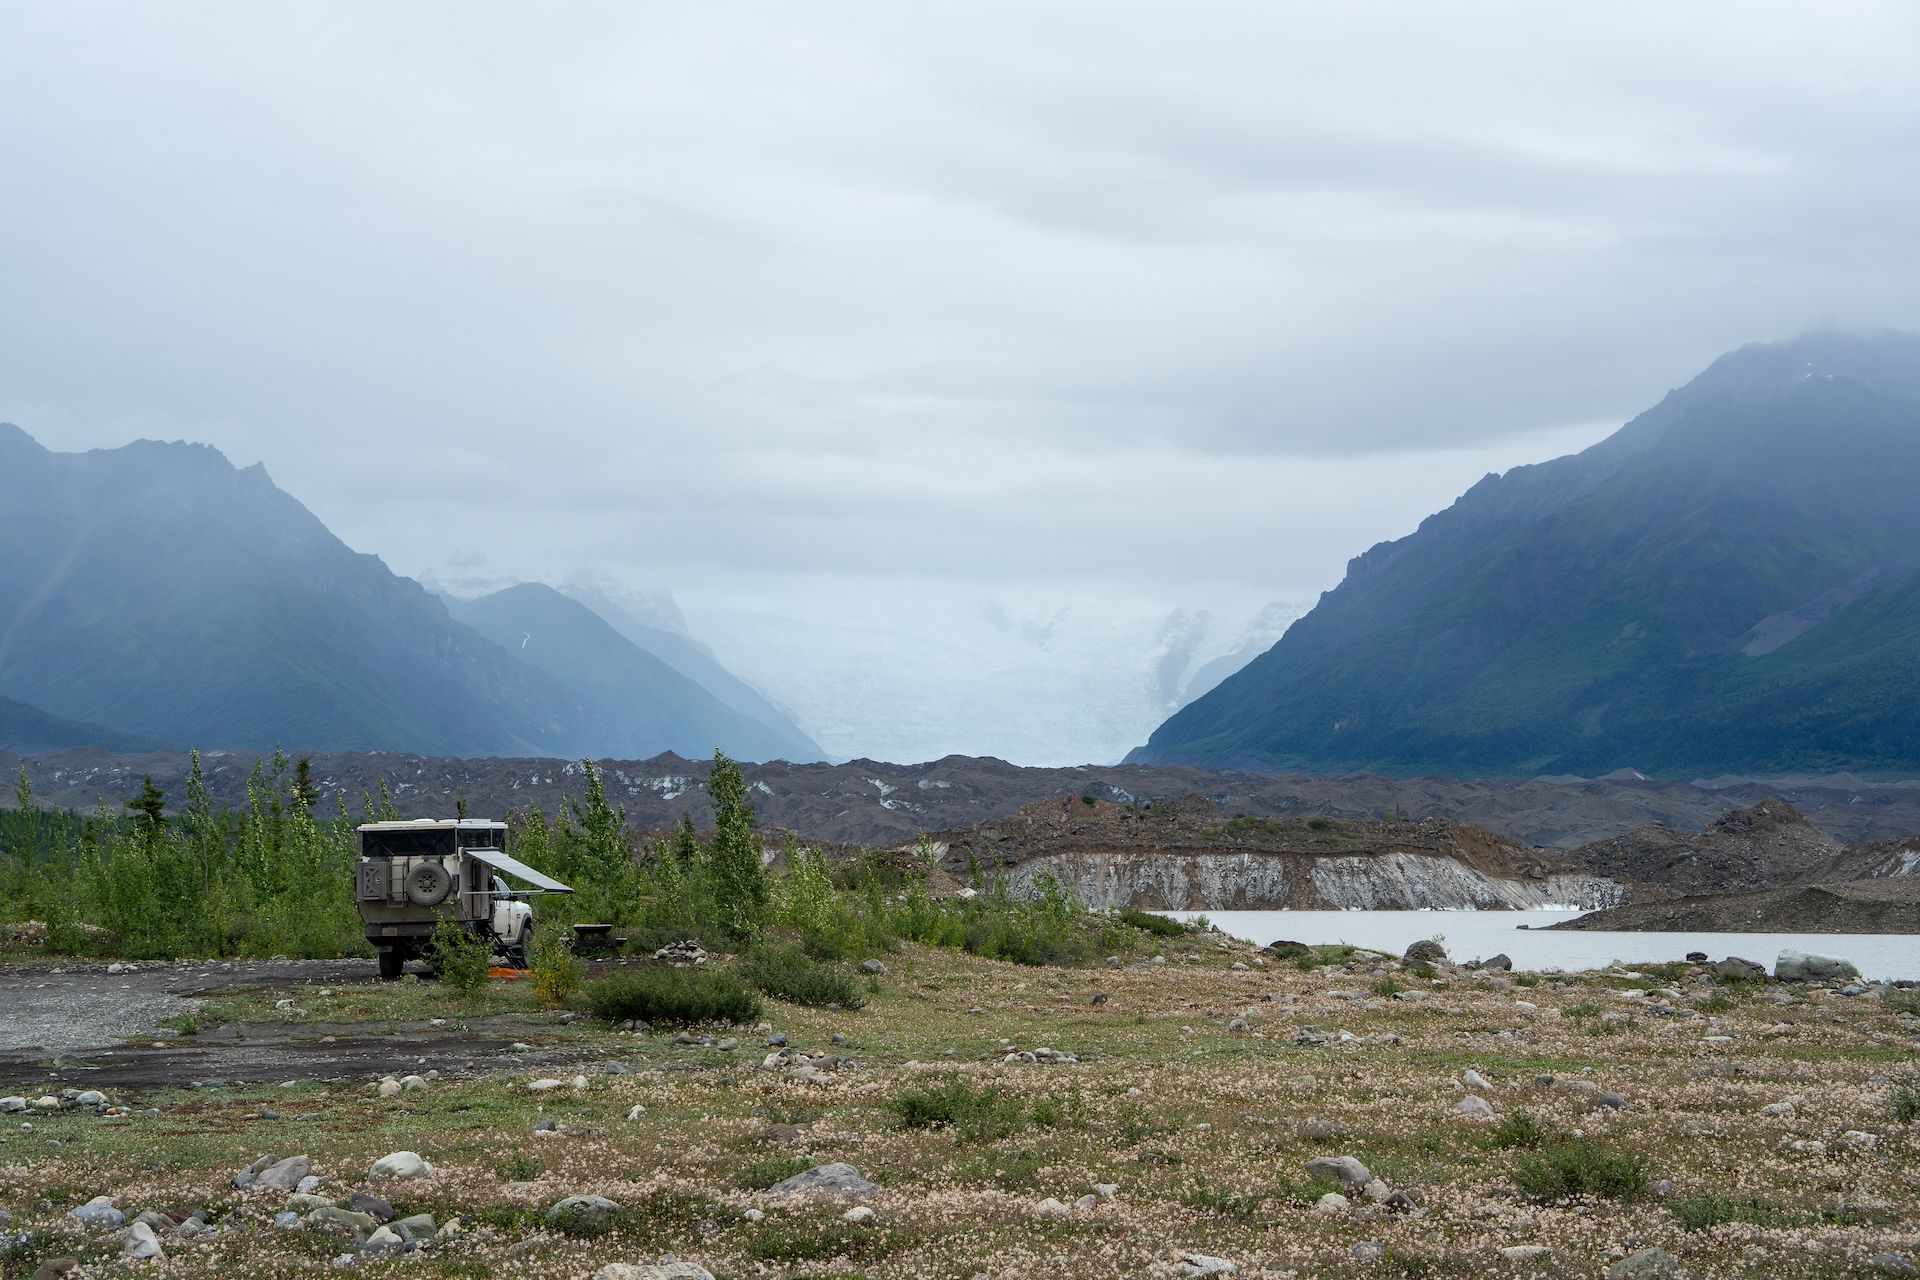 Camping in front of the toe of Kennicott Glacier with Root Glacier in the back. Majestic!